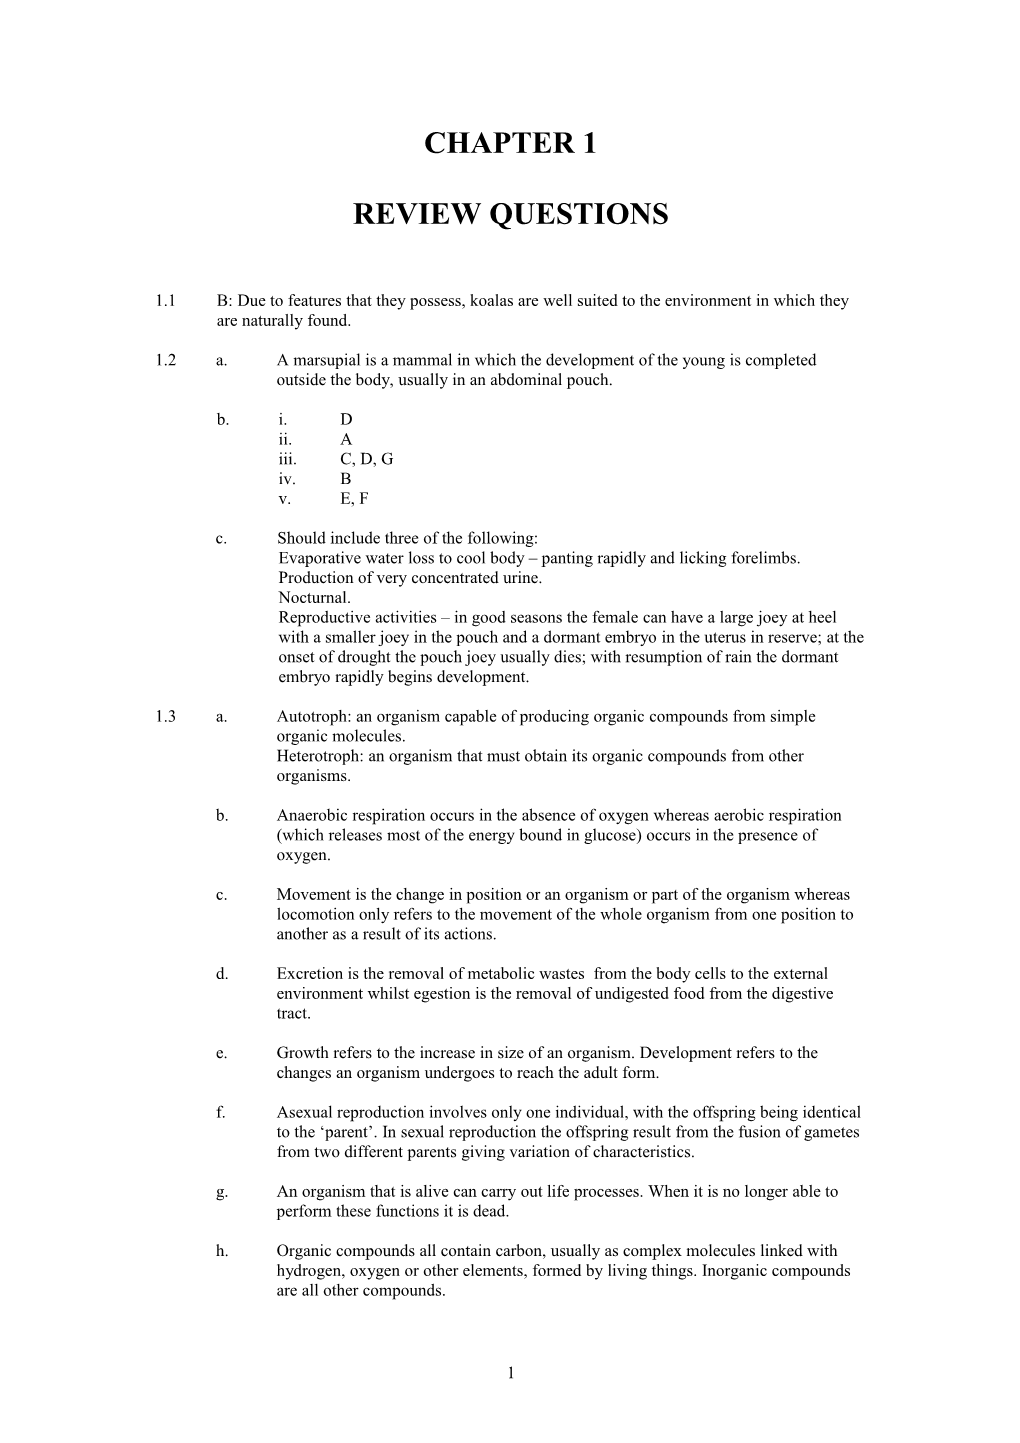 Review Questions s2